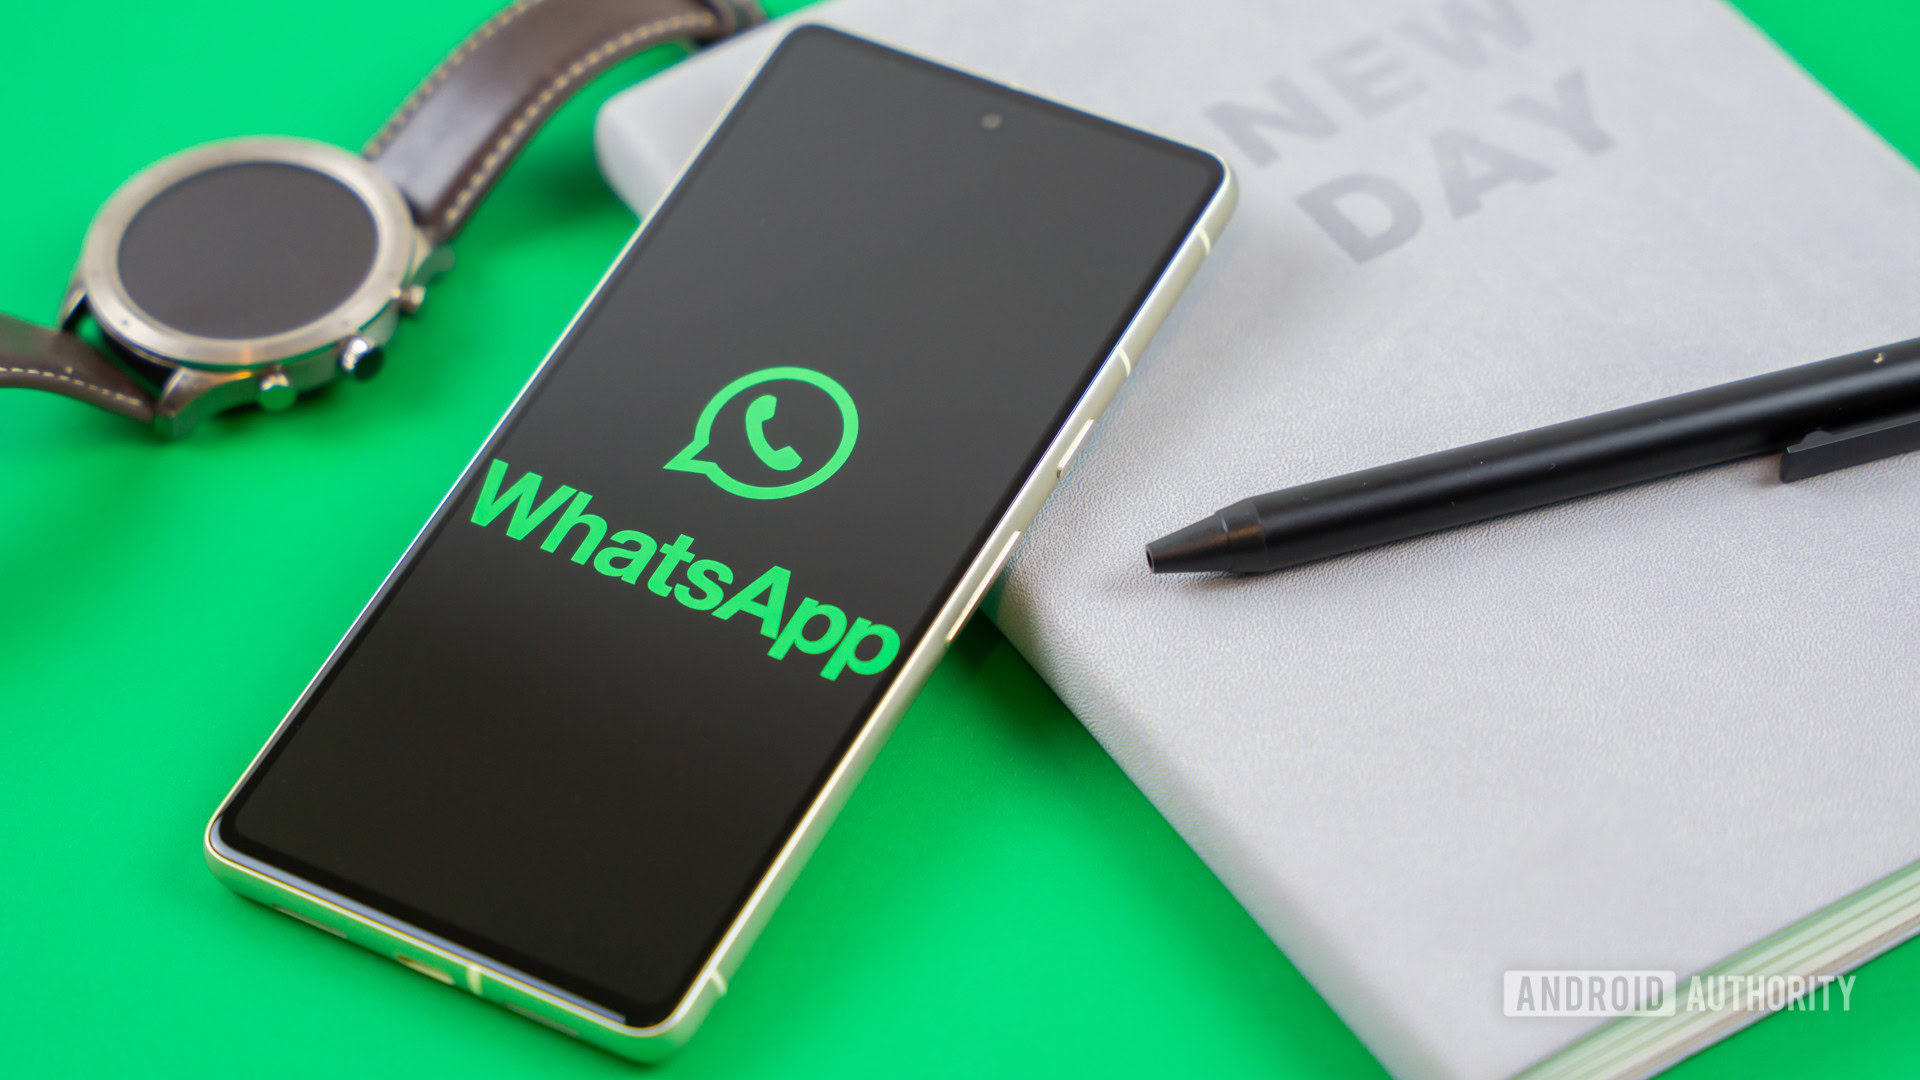 Hate WhatsApp’s green theme? You may need to buy an iPhone to change it